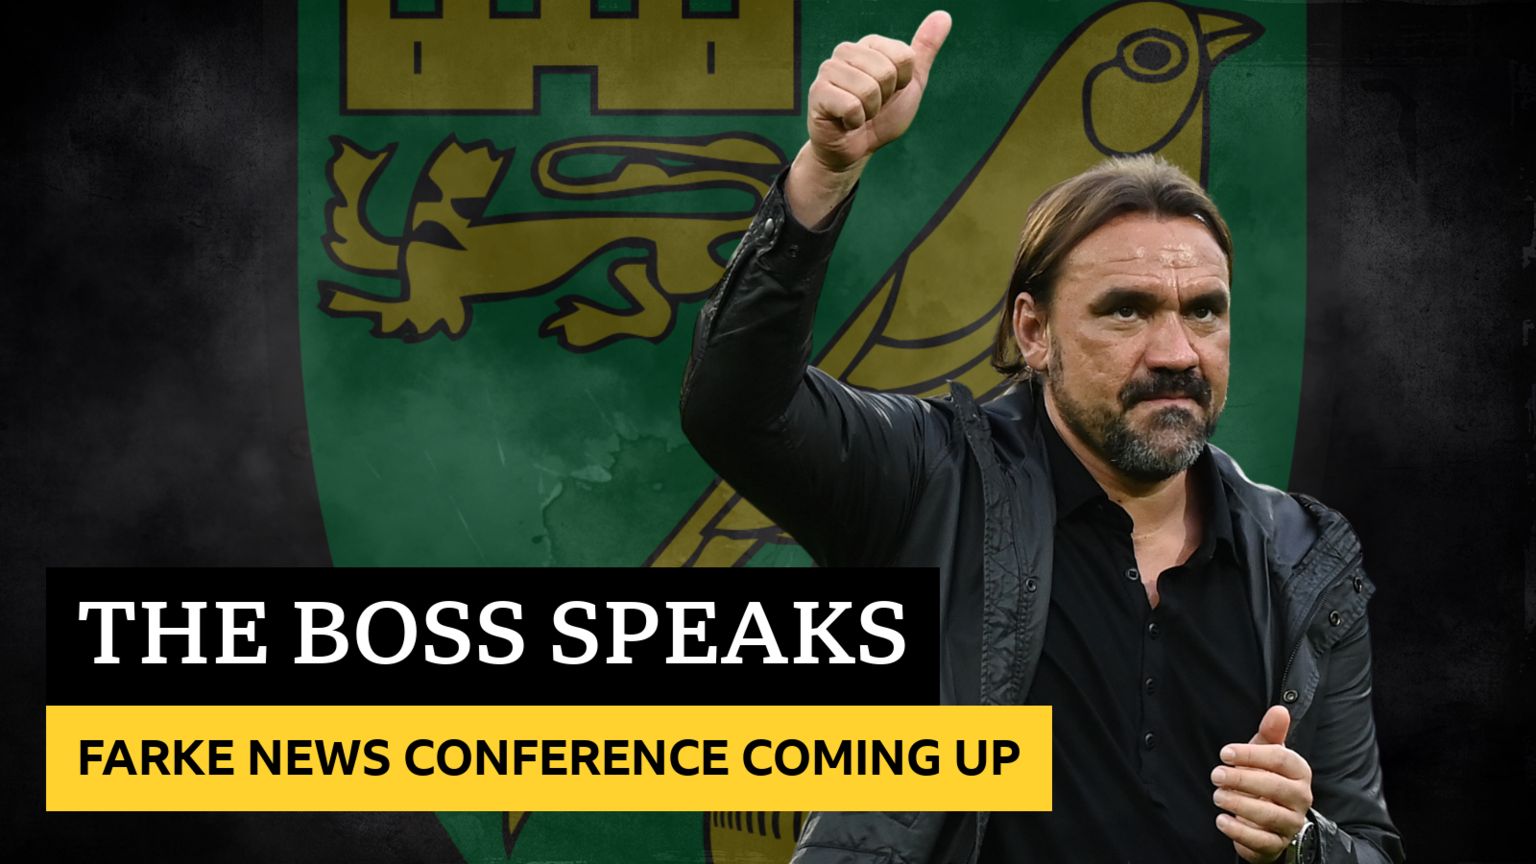 Daniel Farke news conference coming up